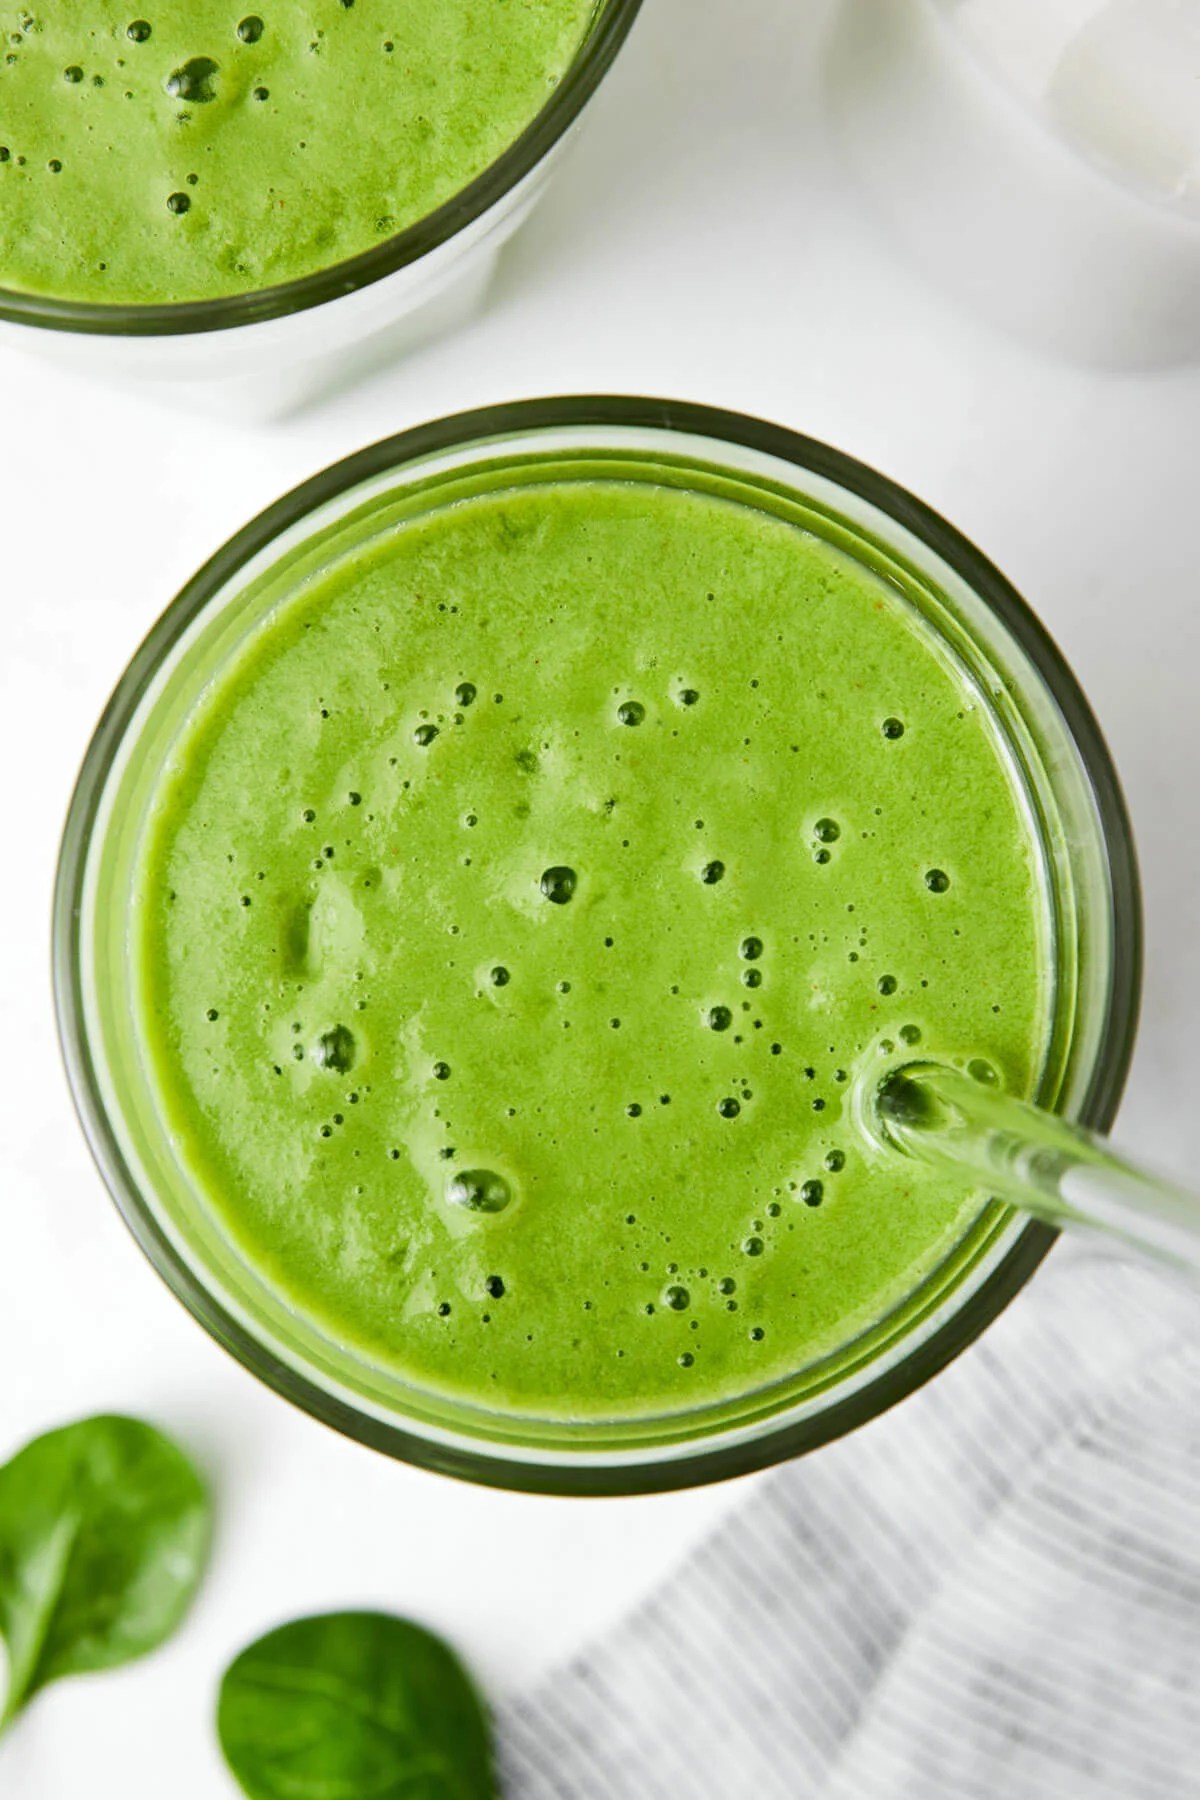 Green smoothie in a cup with a straw.